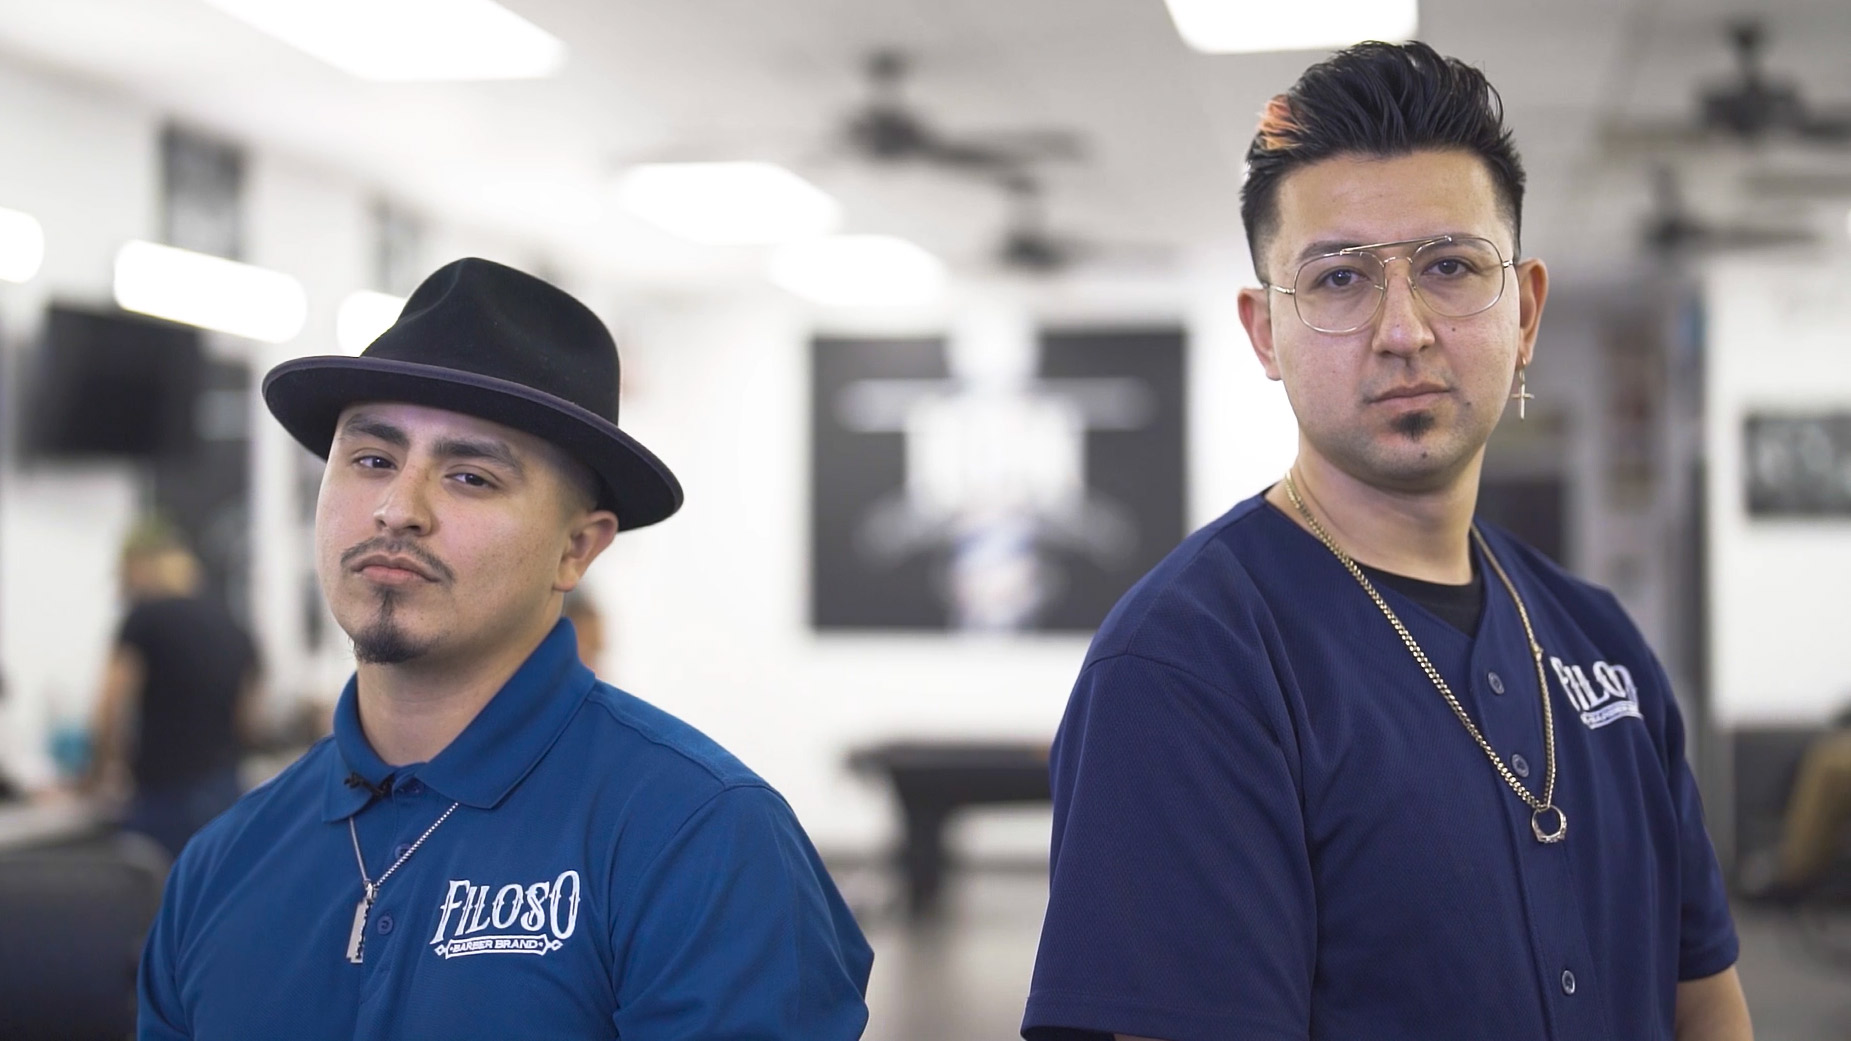 Filoso Barber Brand Becomes The First To Create a Latino-Owned Razor Blade For Barbers in The U.S.